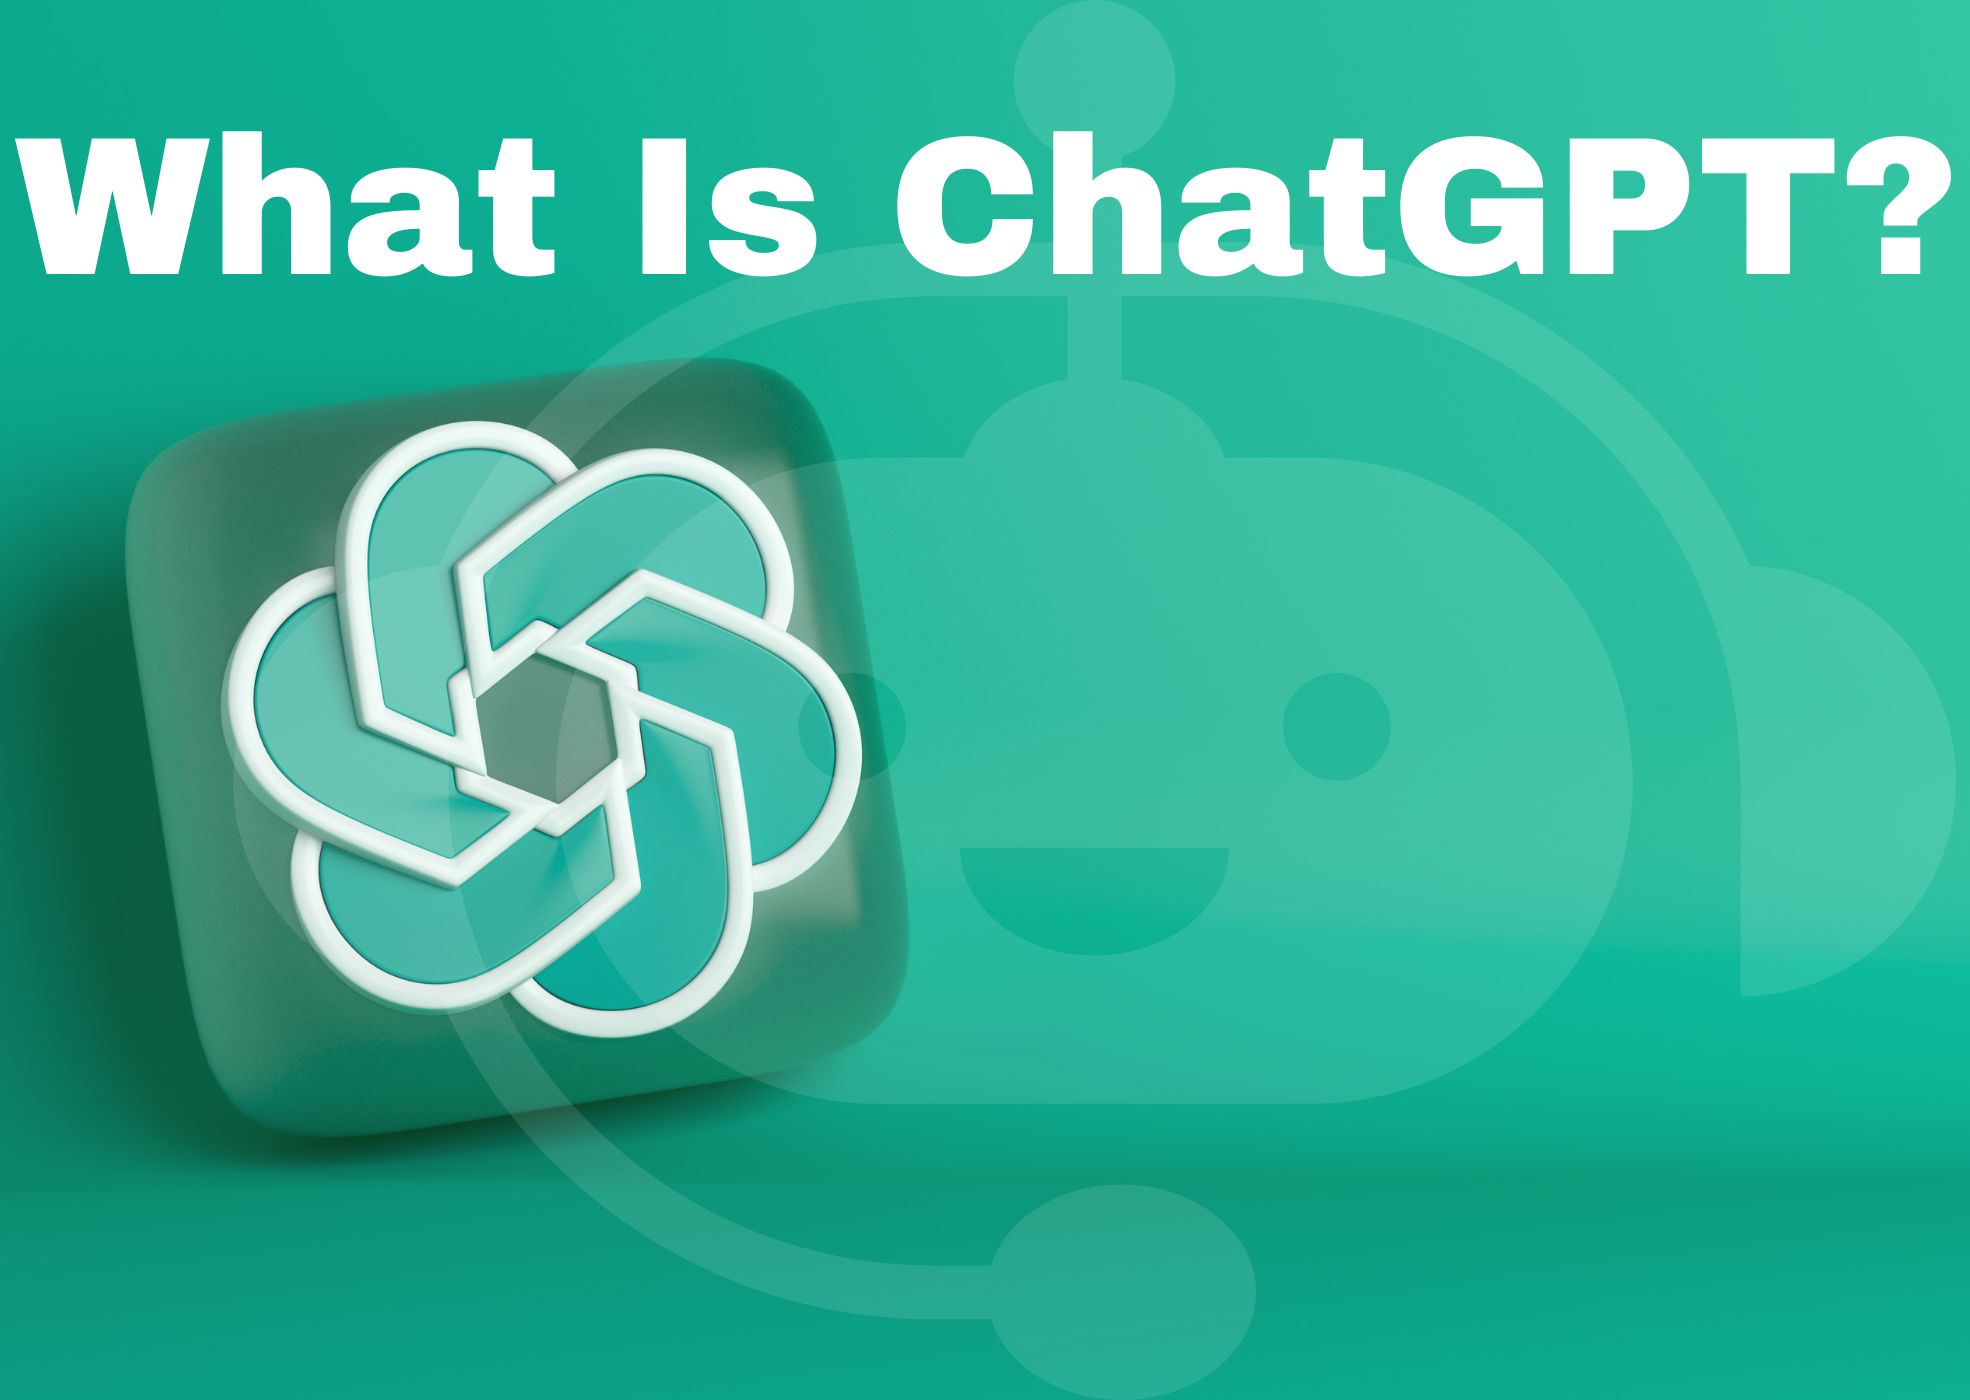 Image with the words "What Is ChatGPT'.